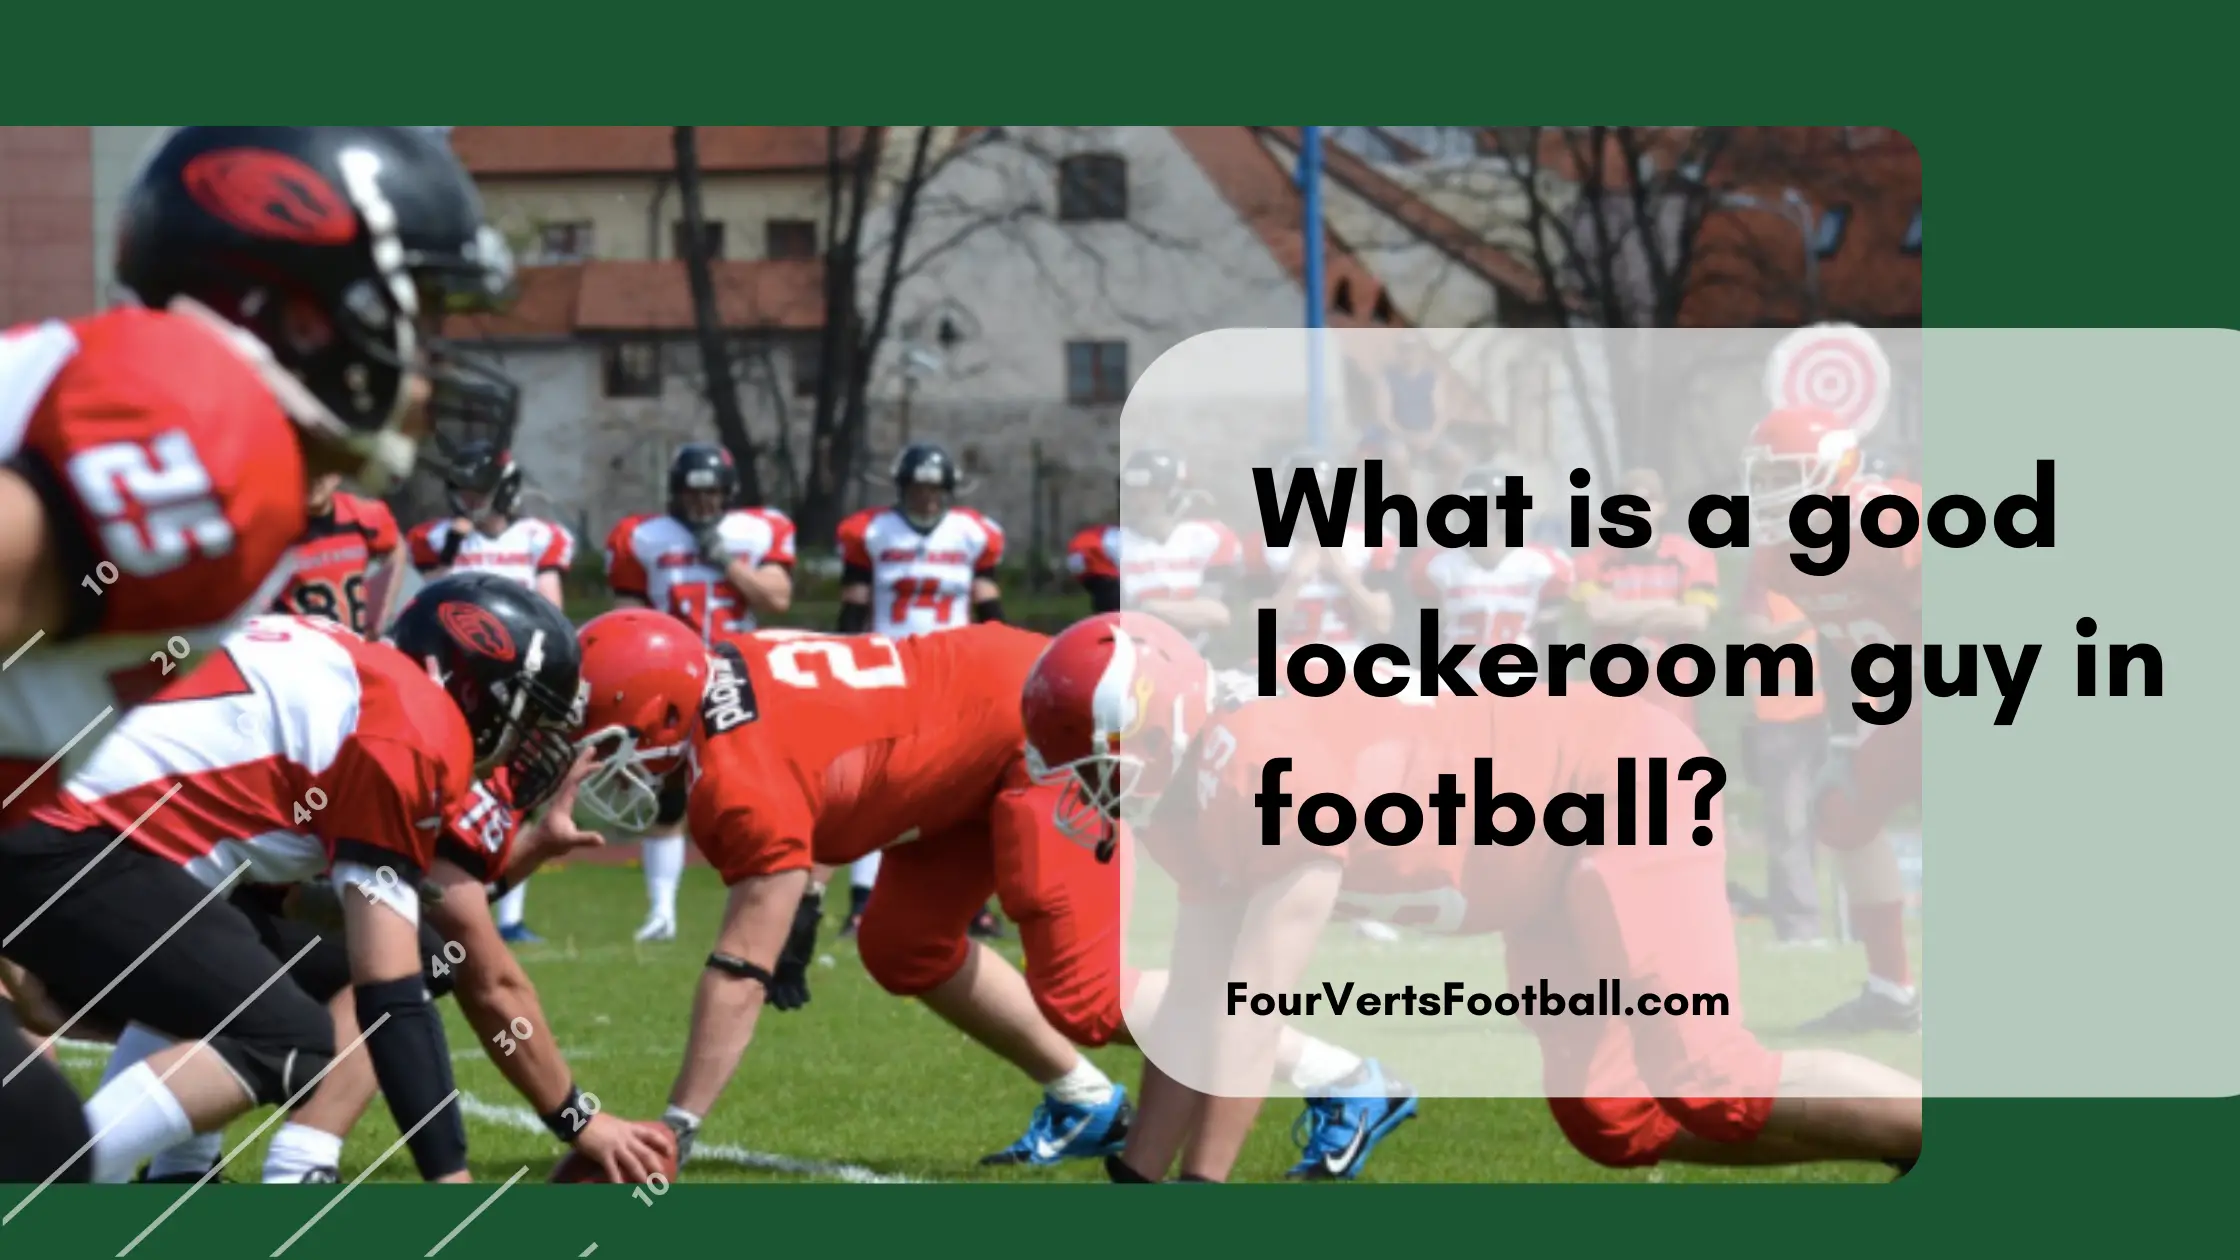 What Is A Good Locker Room Guy In Football?